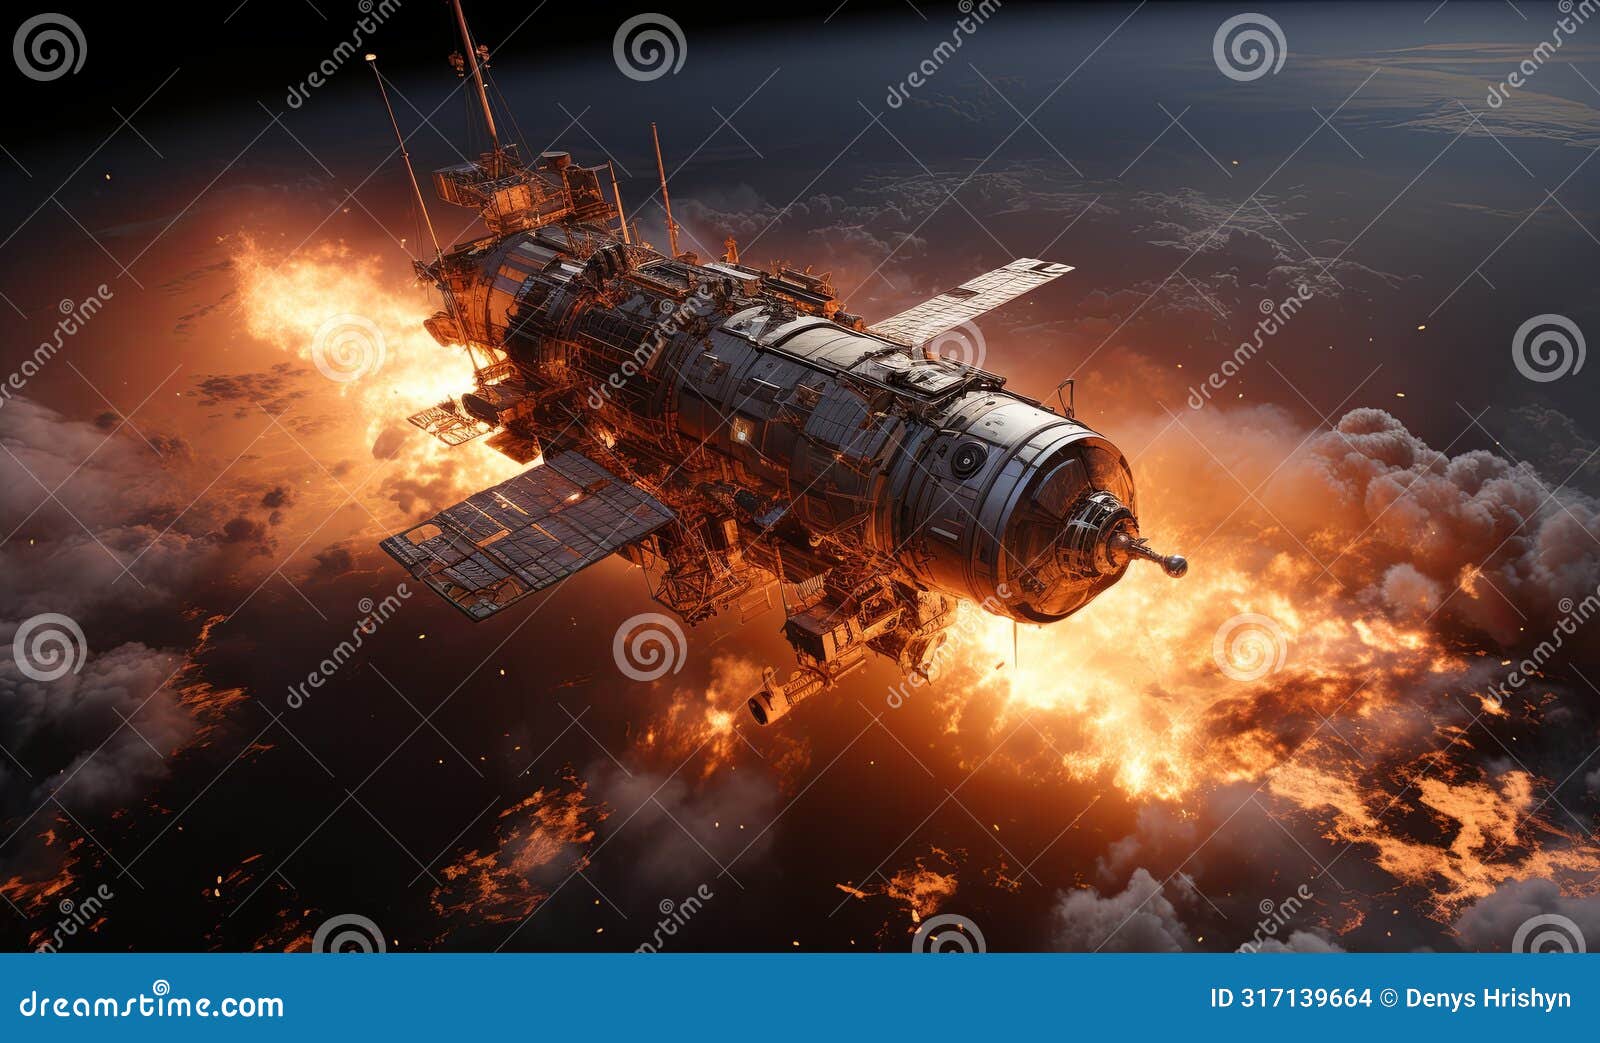 space station engulfed in flames